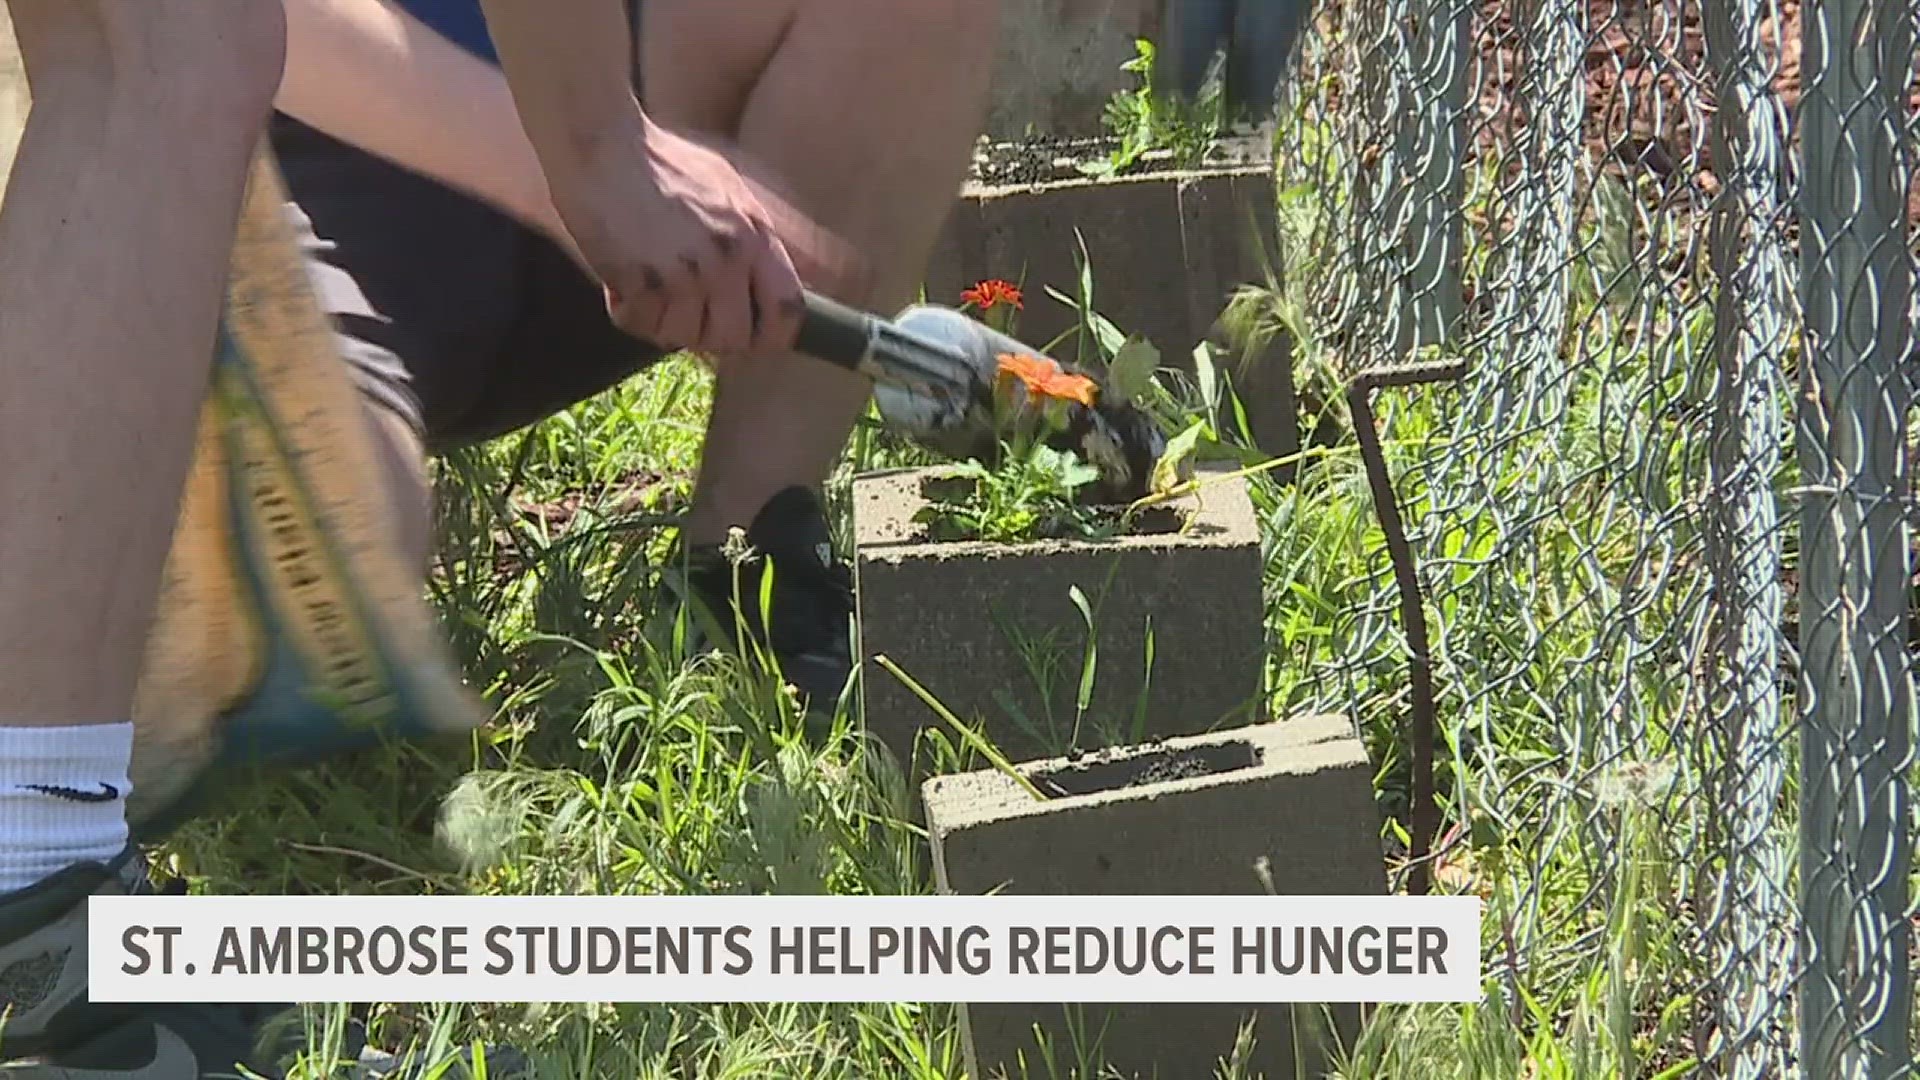 They're growing fruits and vegetables in a community garden with the help of People Uniting Neighbors and Churches, or P.U.N.C.H., a community outreach organization.